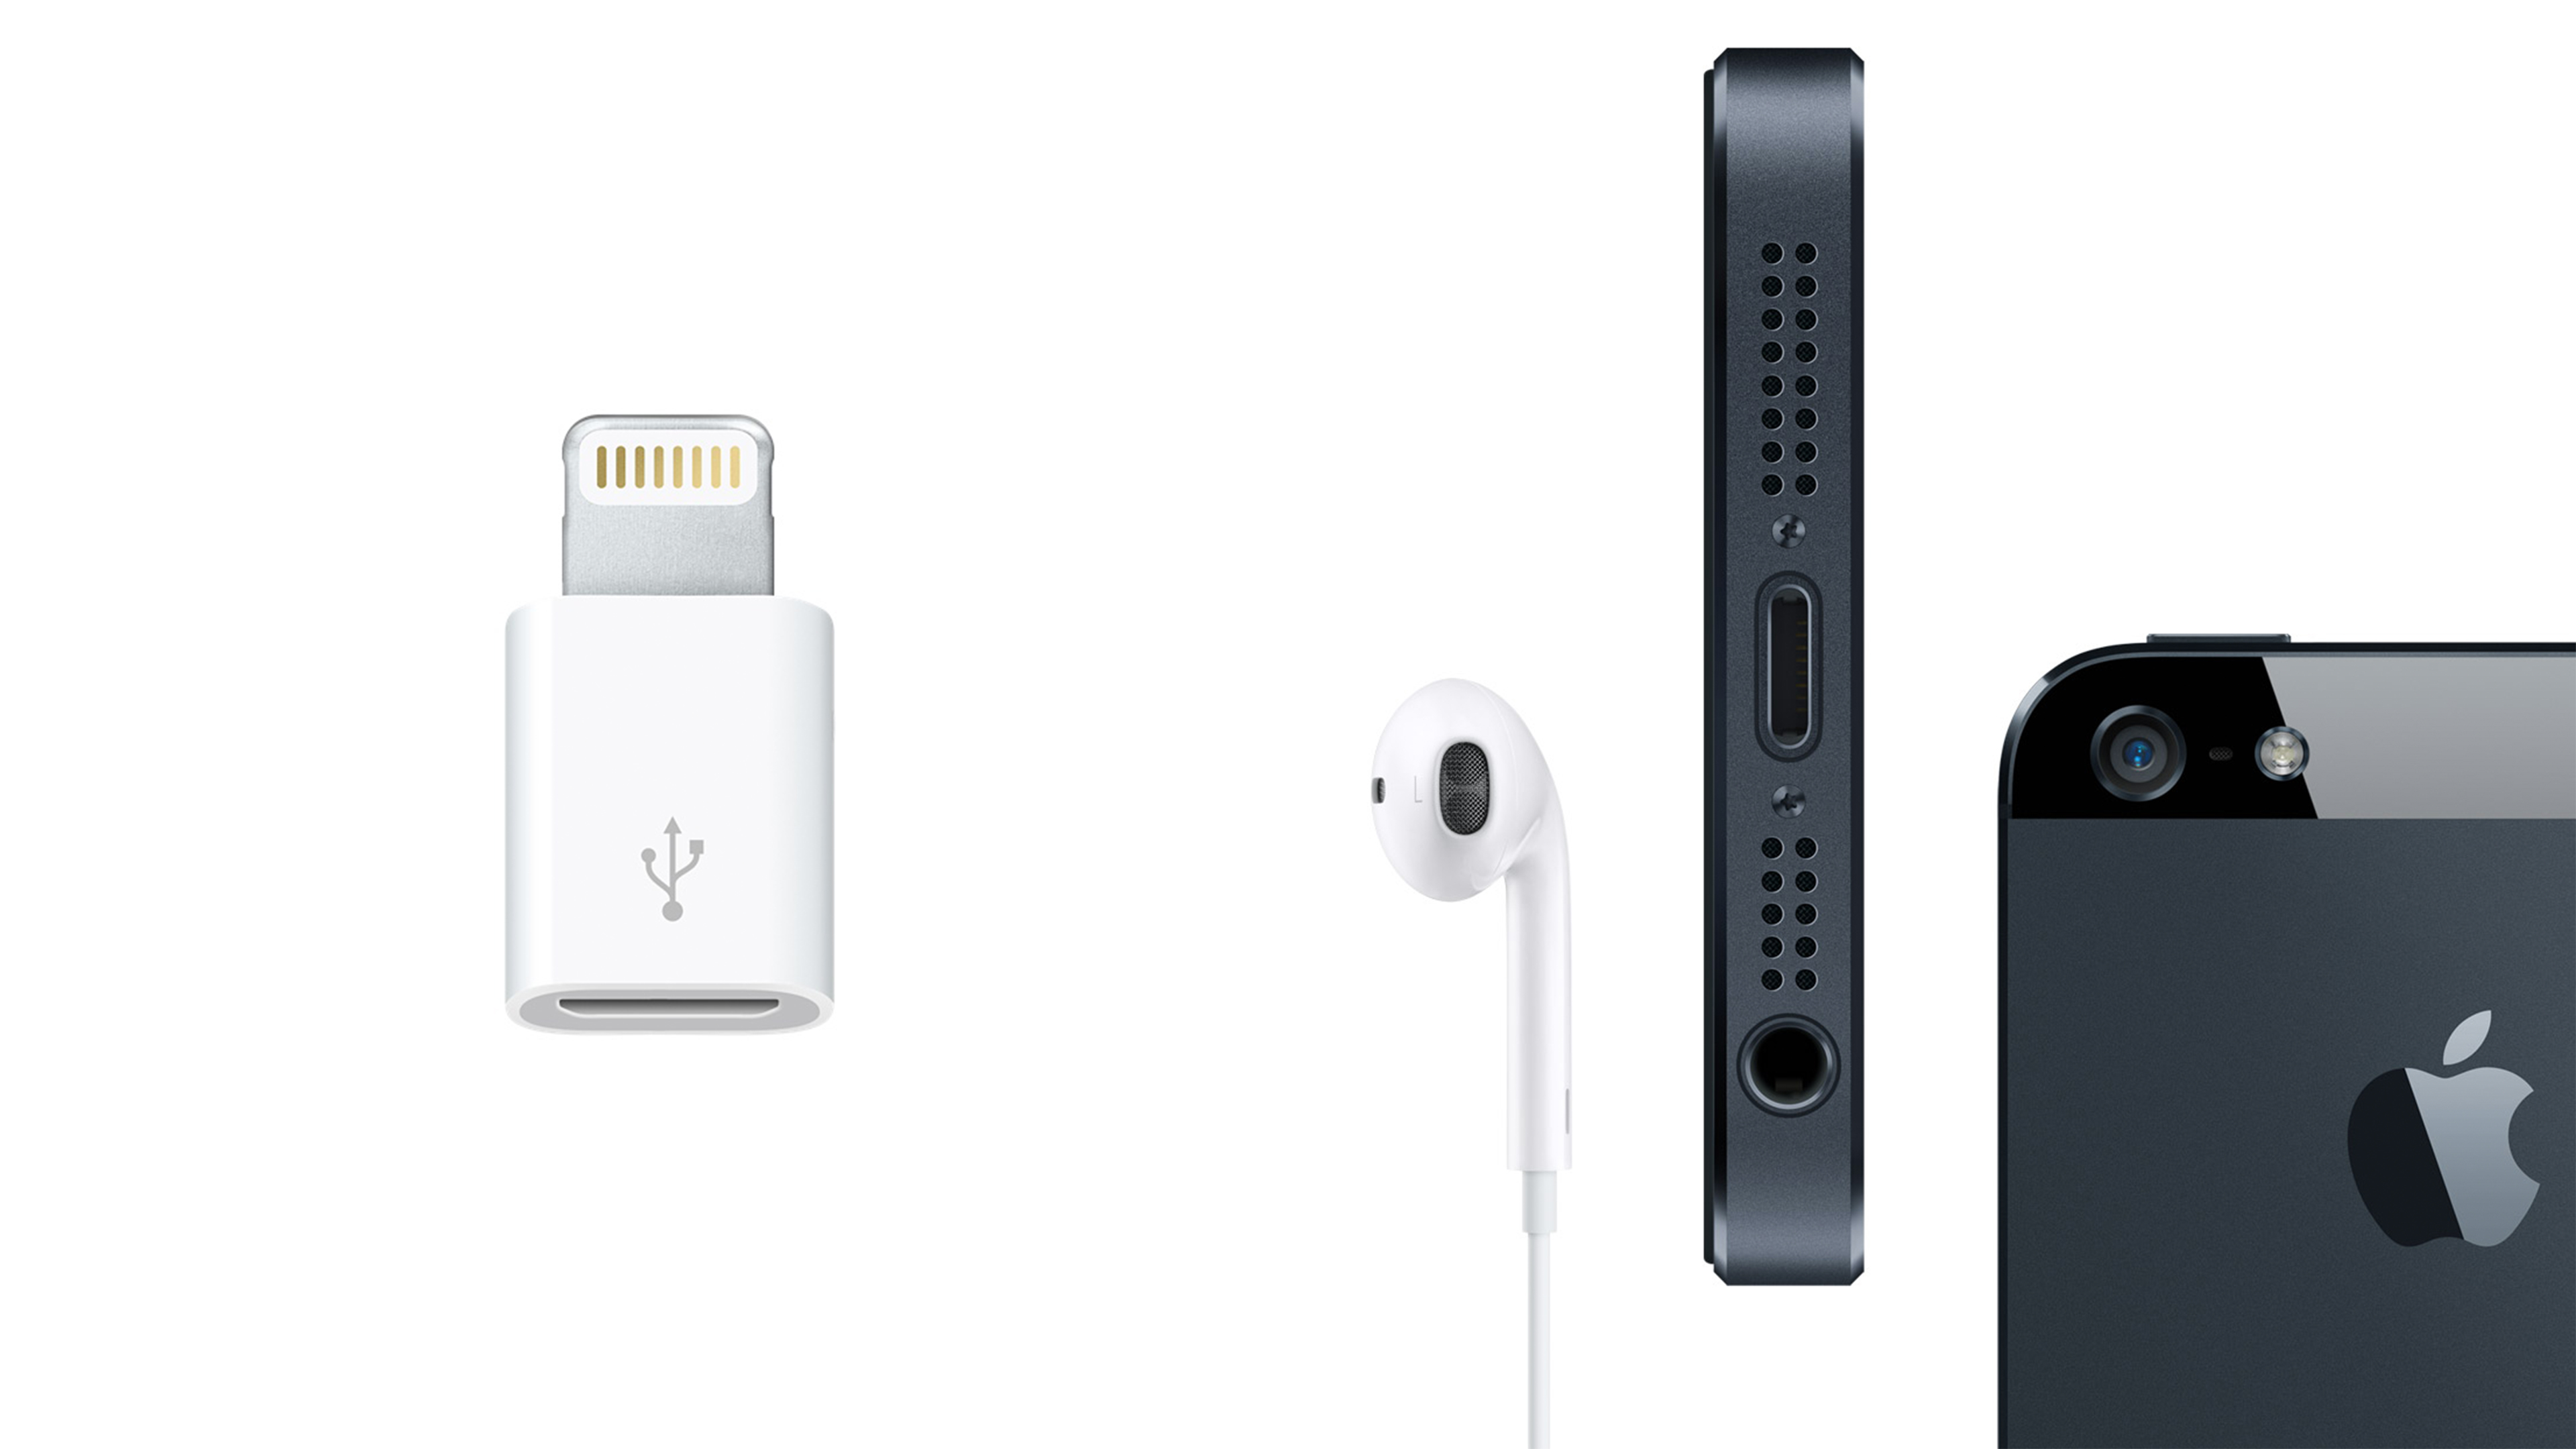 Revisiting forgotten history obscure Apple accessories - 9to5Mac